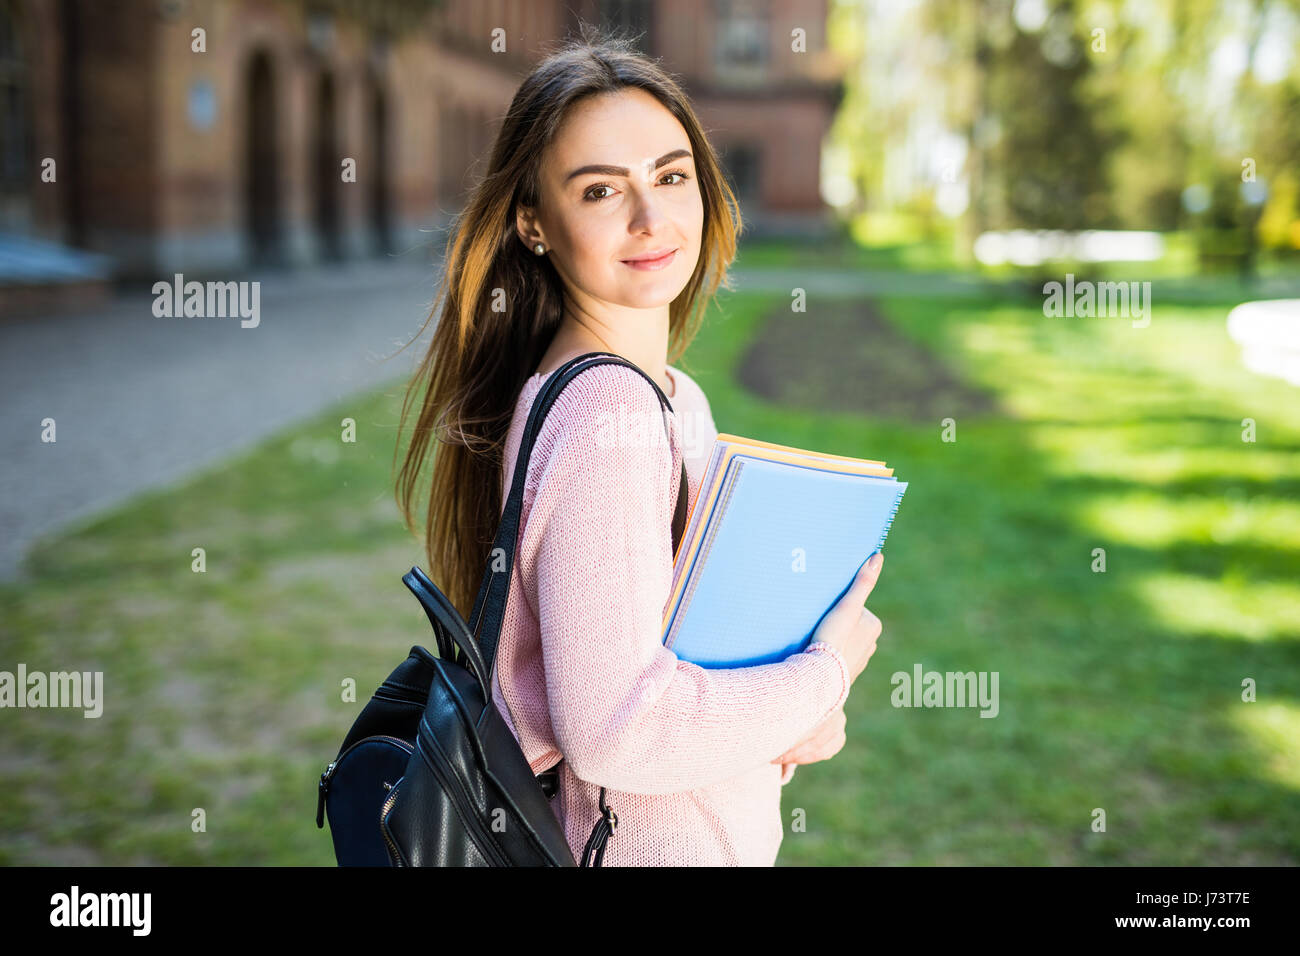 University student girl looking happy smiling with book or notebook in campus park. Caucasian young woman female model. Stock Photo